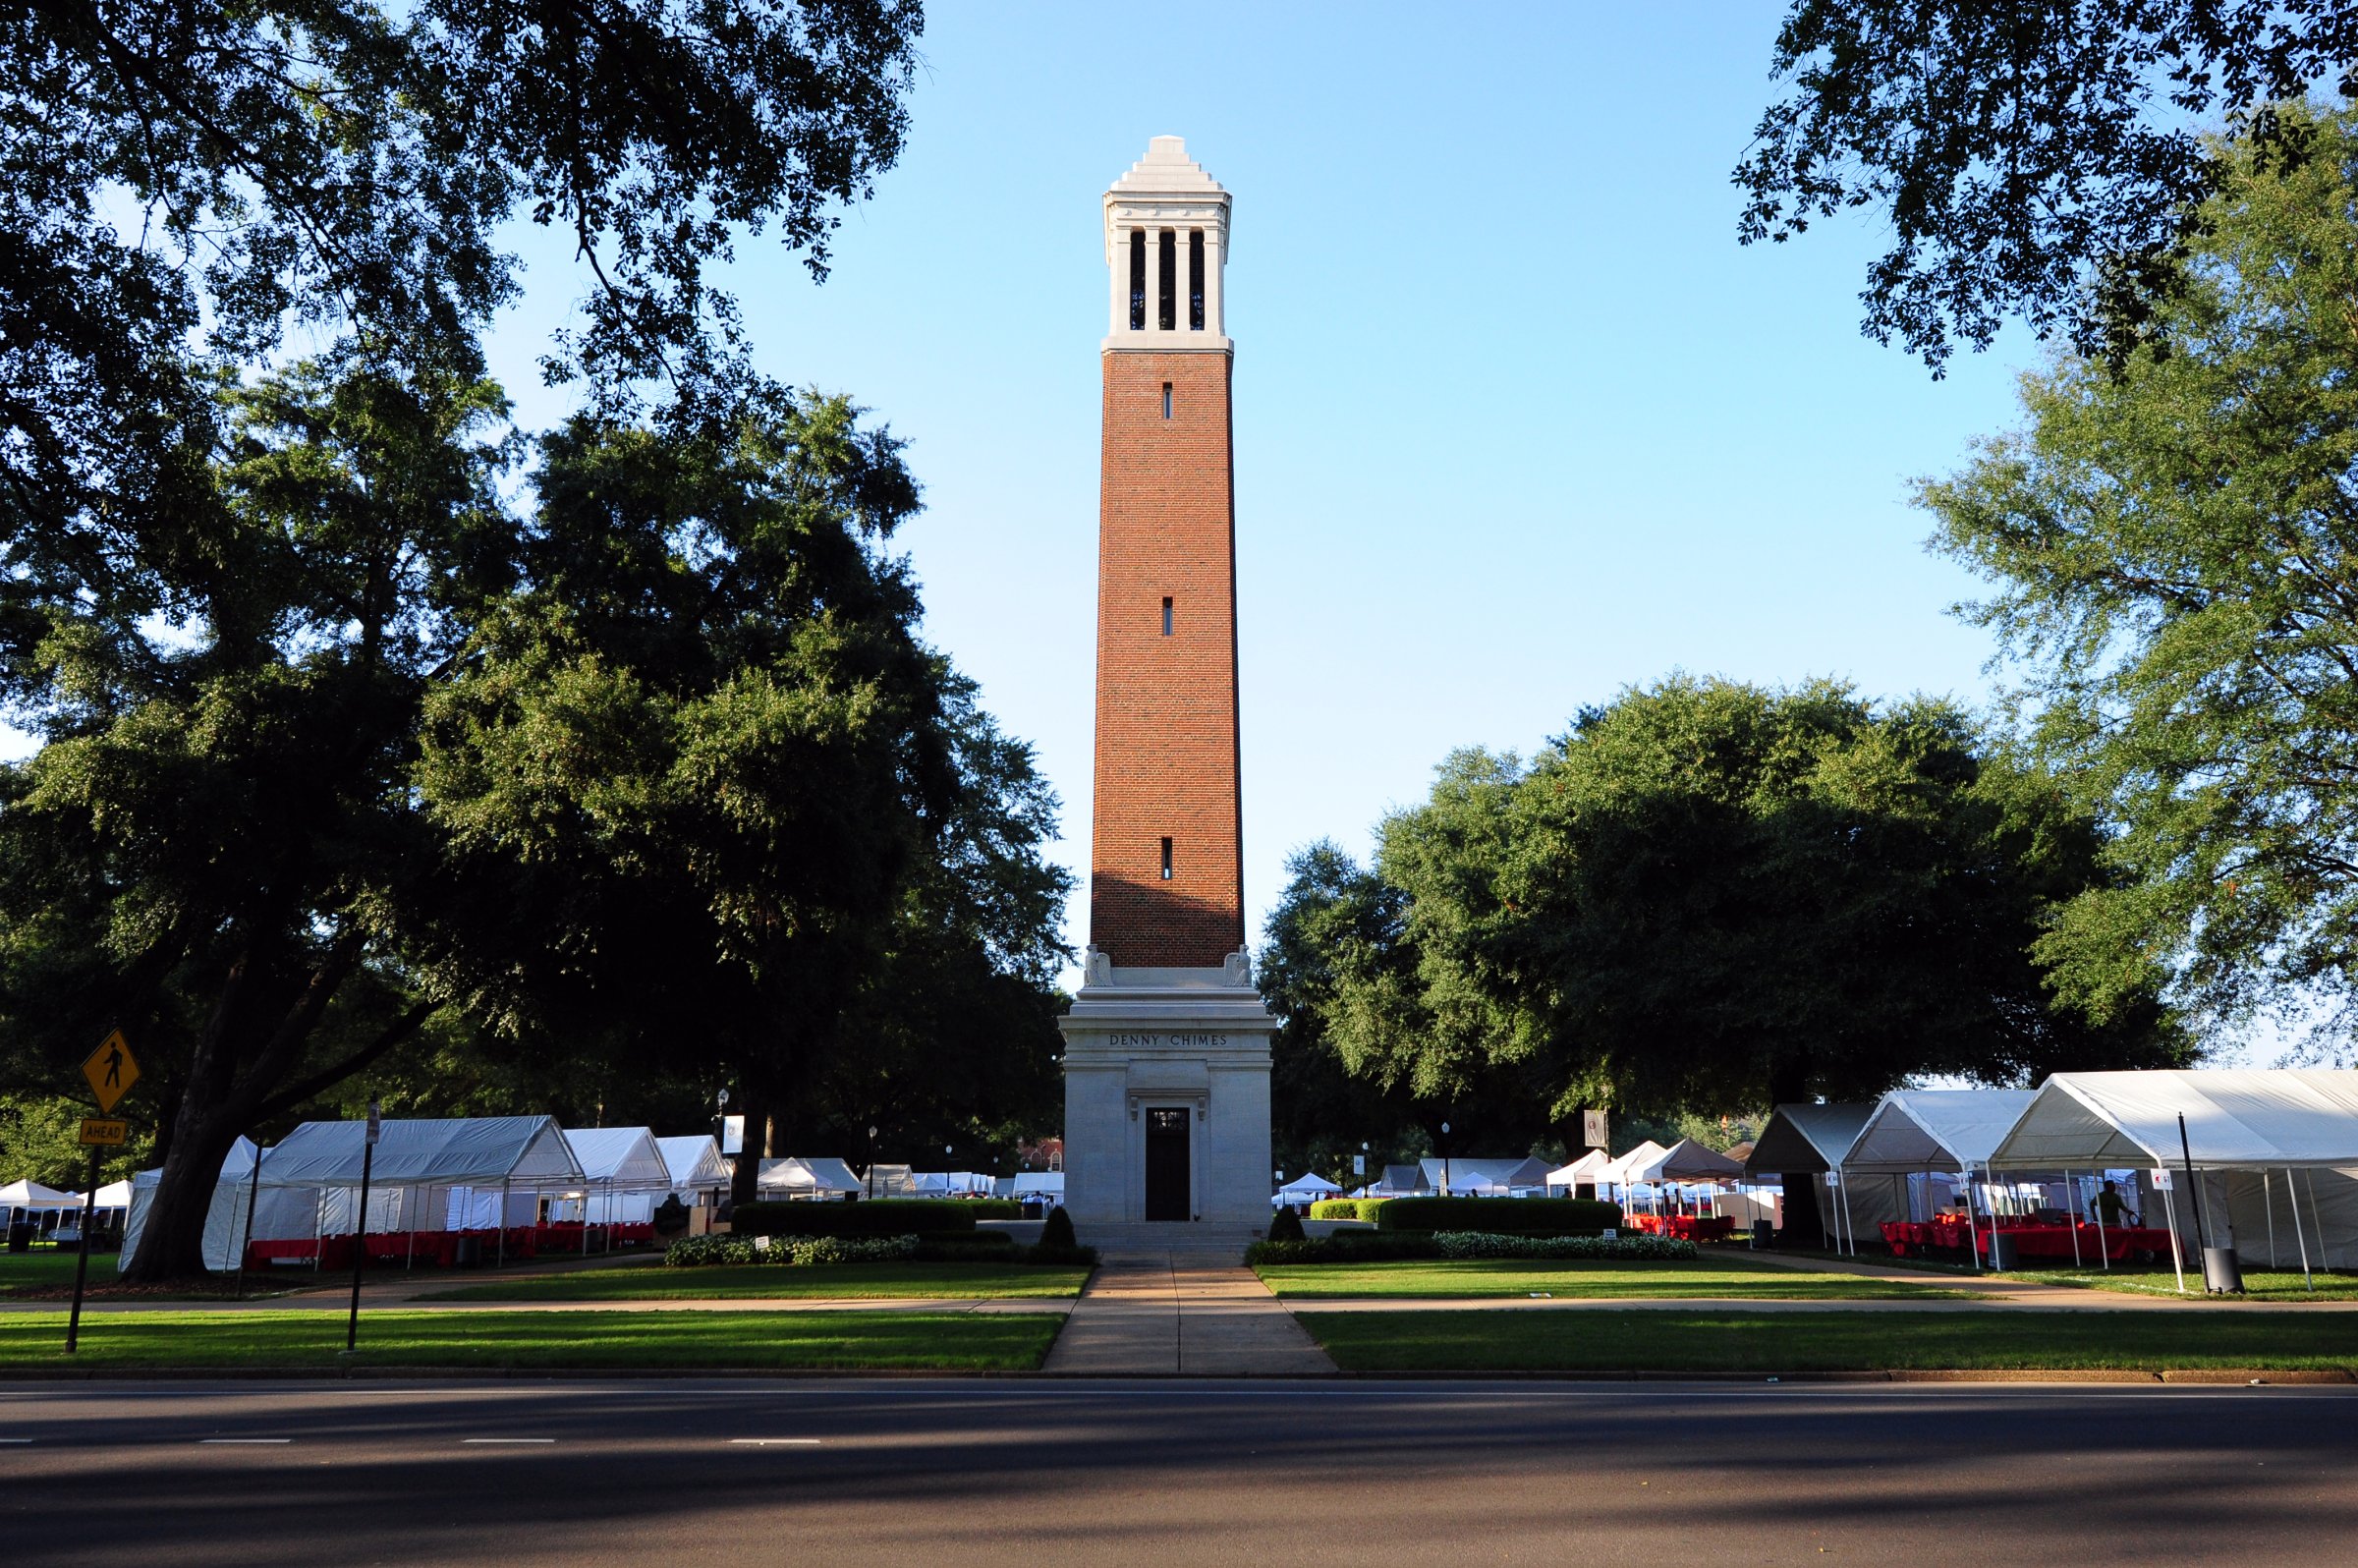 The Denny Chimes on campus of the University of Alabama in Tuscaloosa, Ala.